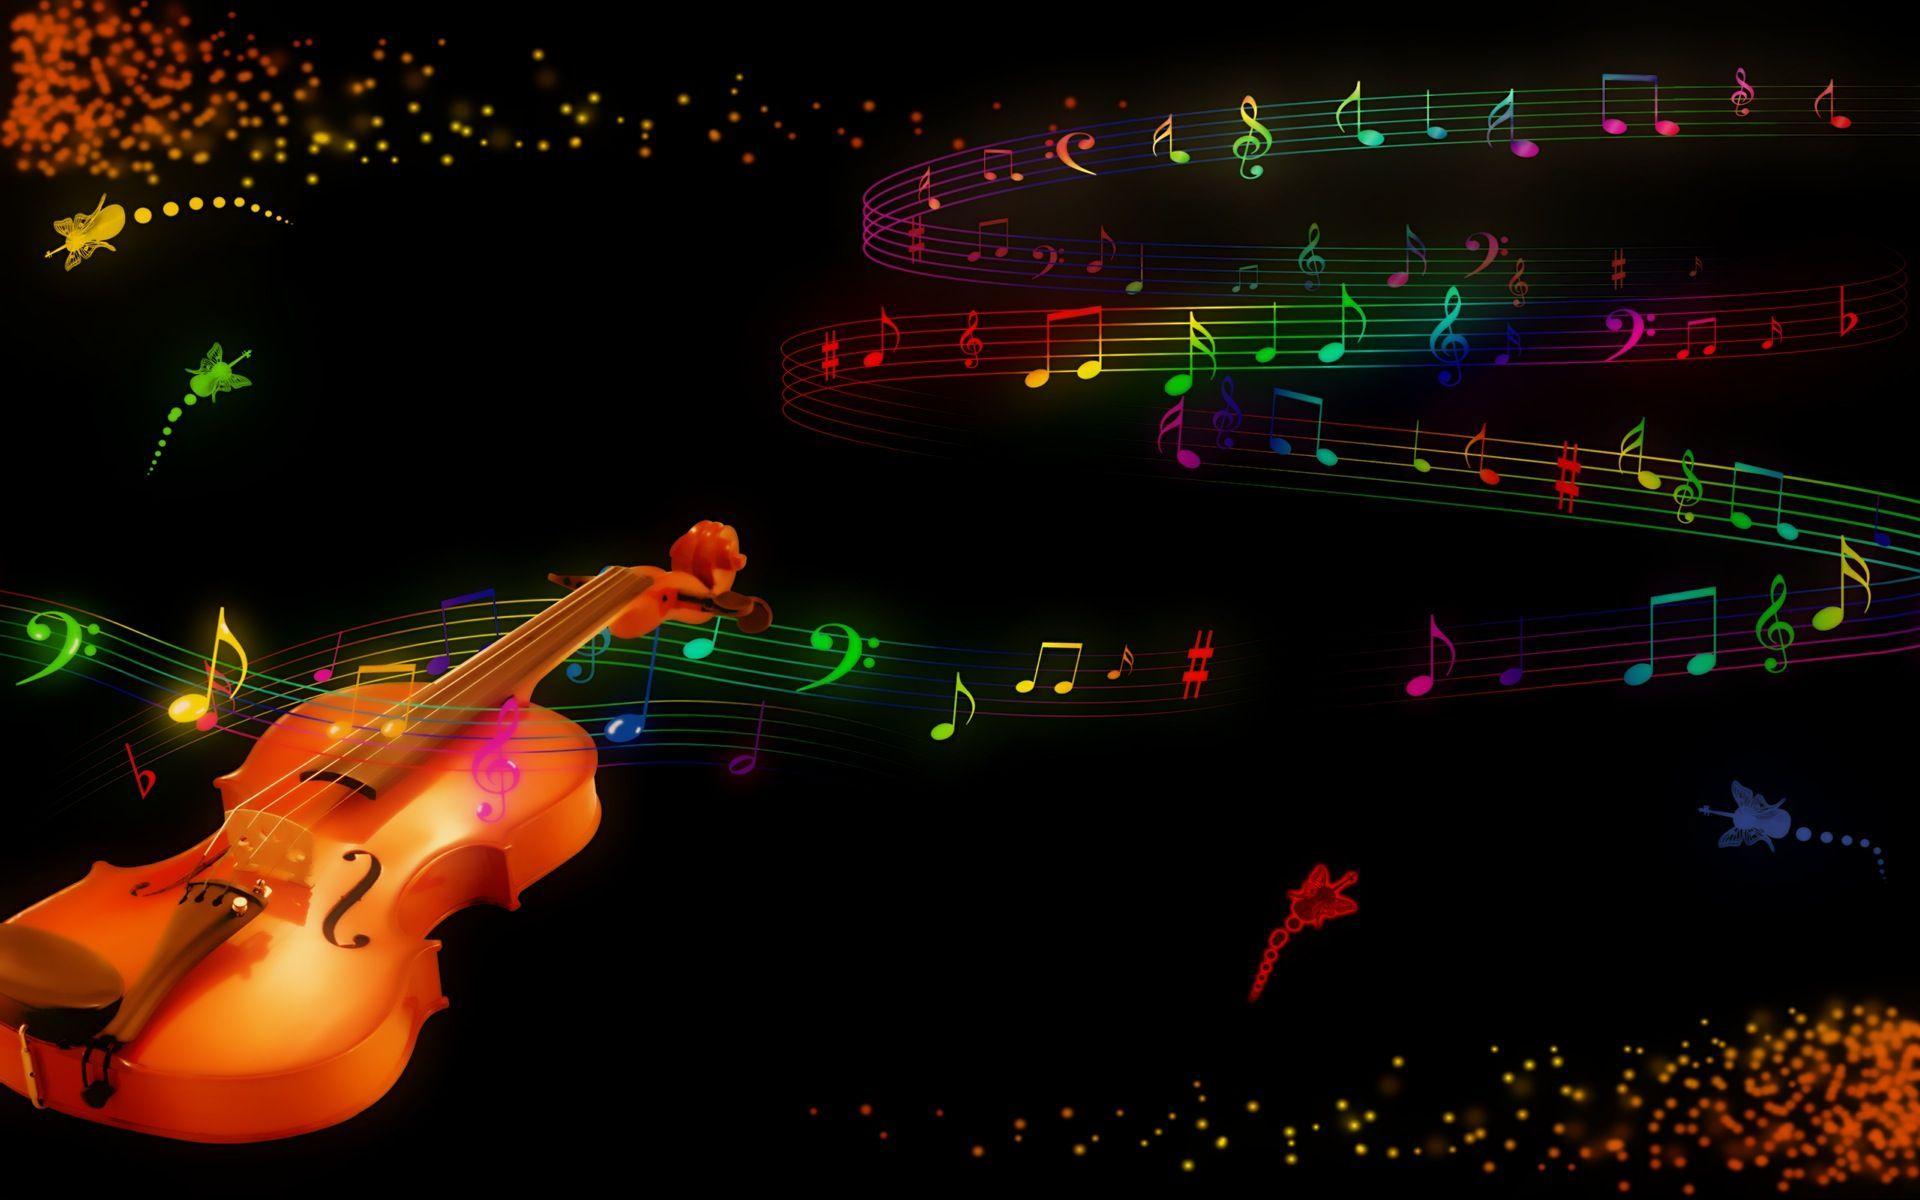 3D Violin and Music Wallpaper. HD 3D and Abstract Wallpaper